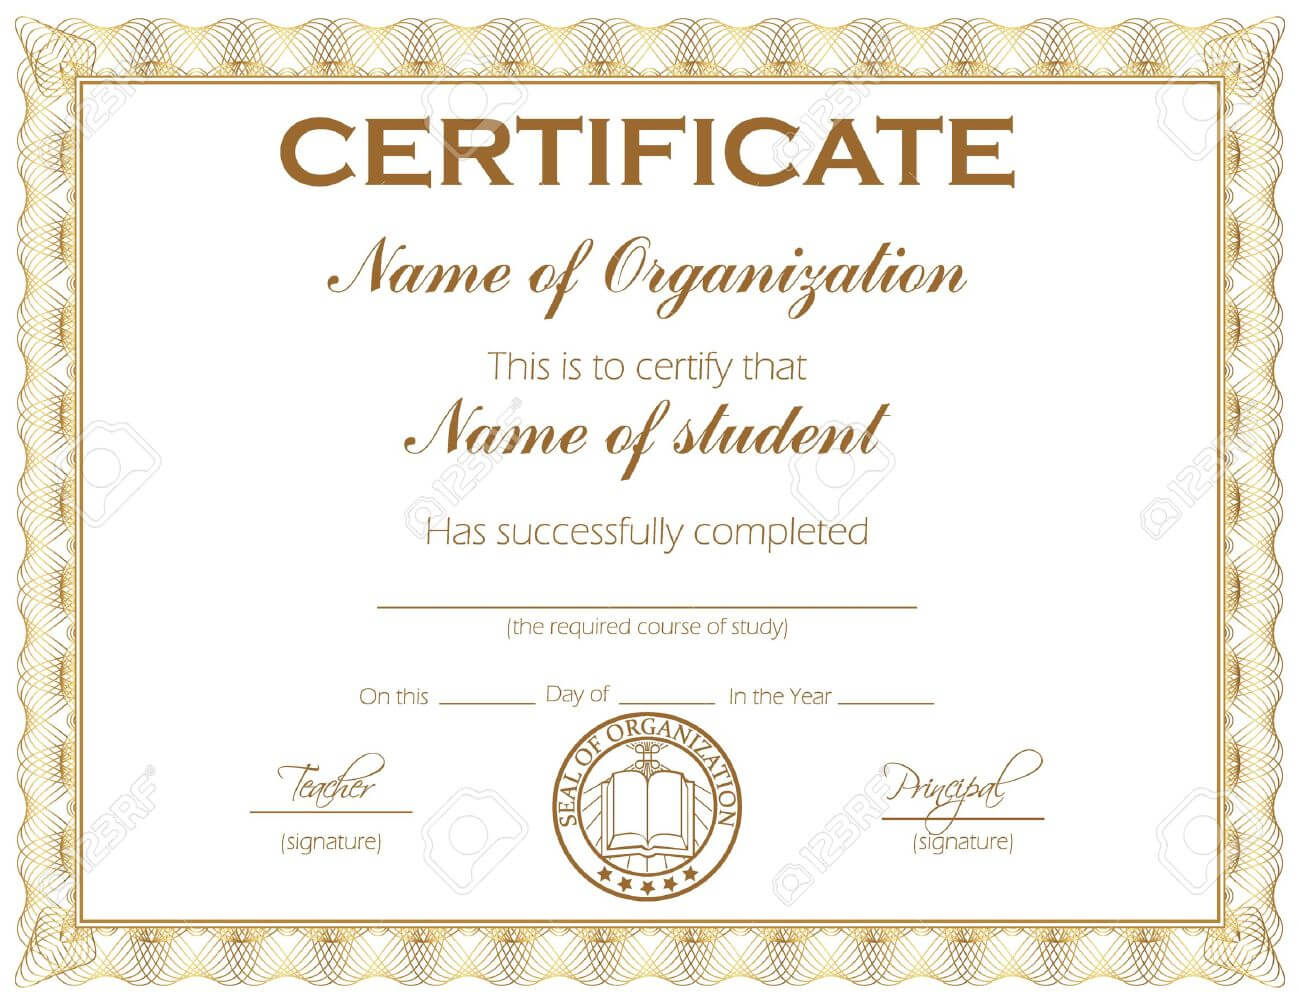 General Purpose Certificate Or Award With Sample Text That Can.. In Student Of The Year Award Certificate Templates